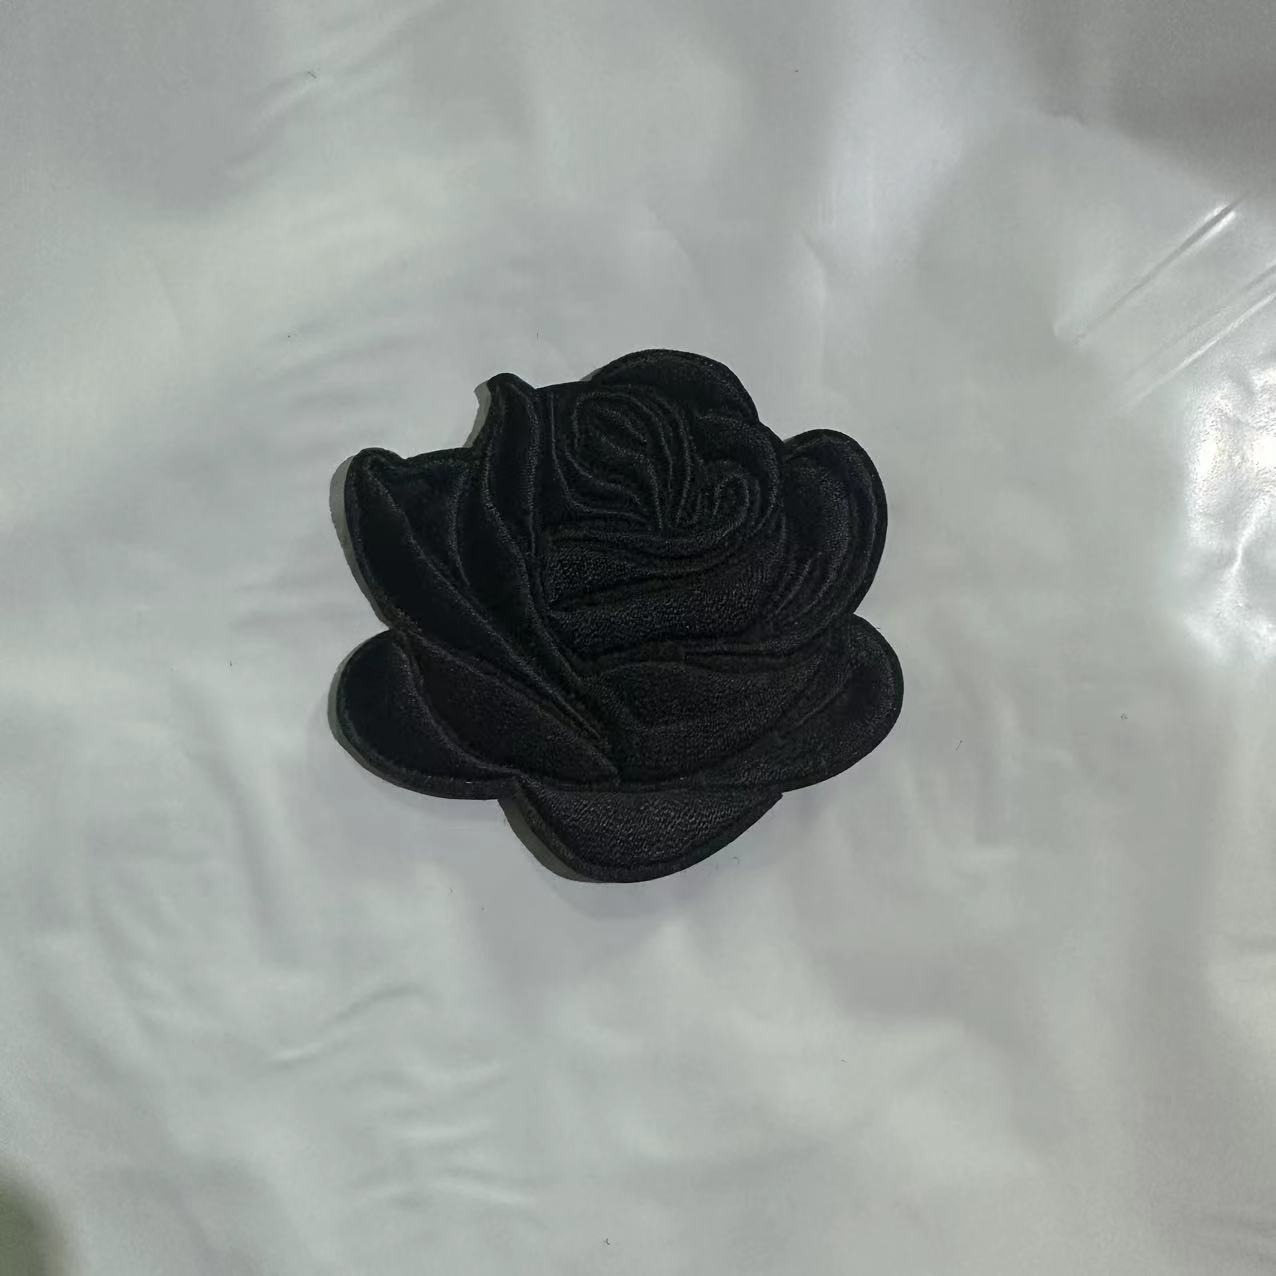 EXCEART 60 Pcs Black Rose Patch Hat Sewing Patches Rose Iron on Embroidery  Flower Applique Jeans Patches Iron on Inside Decor for Home Clothes Decors